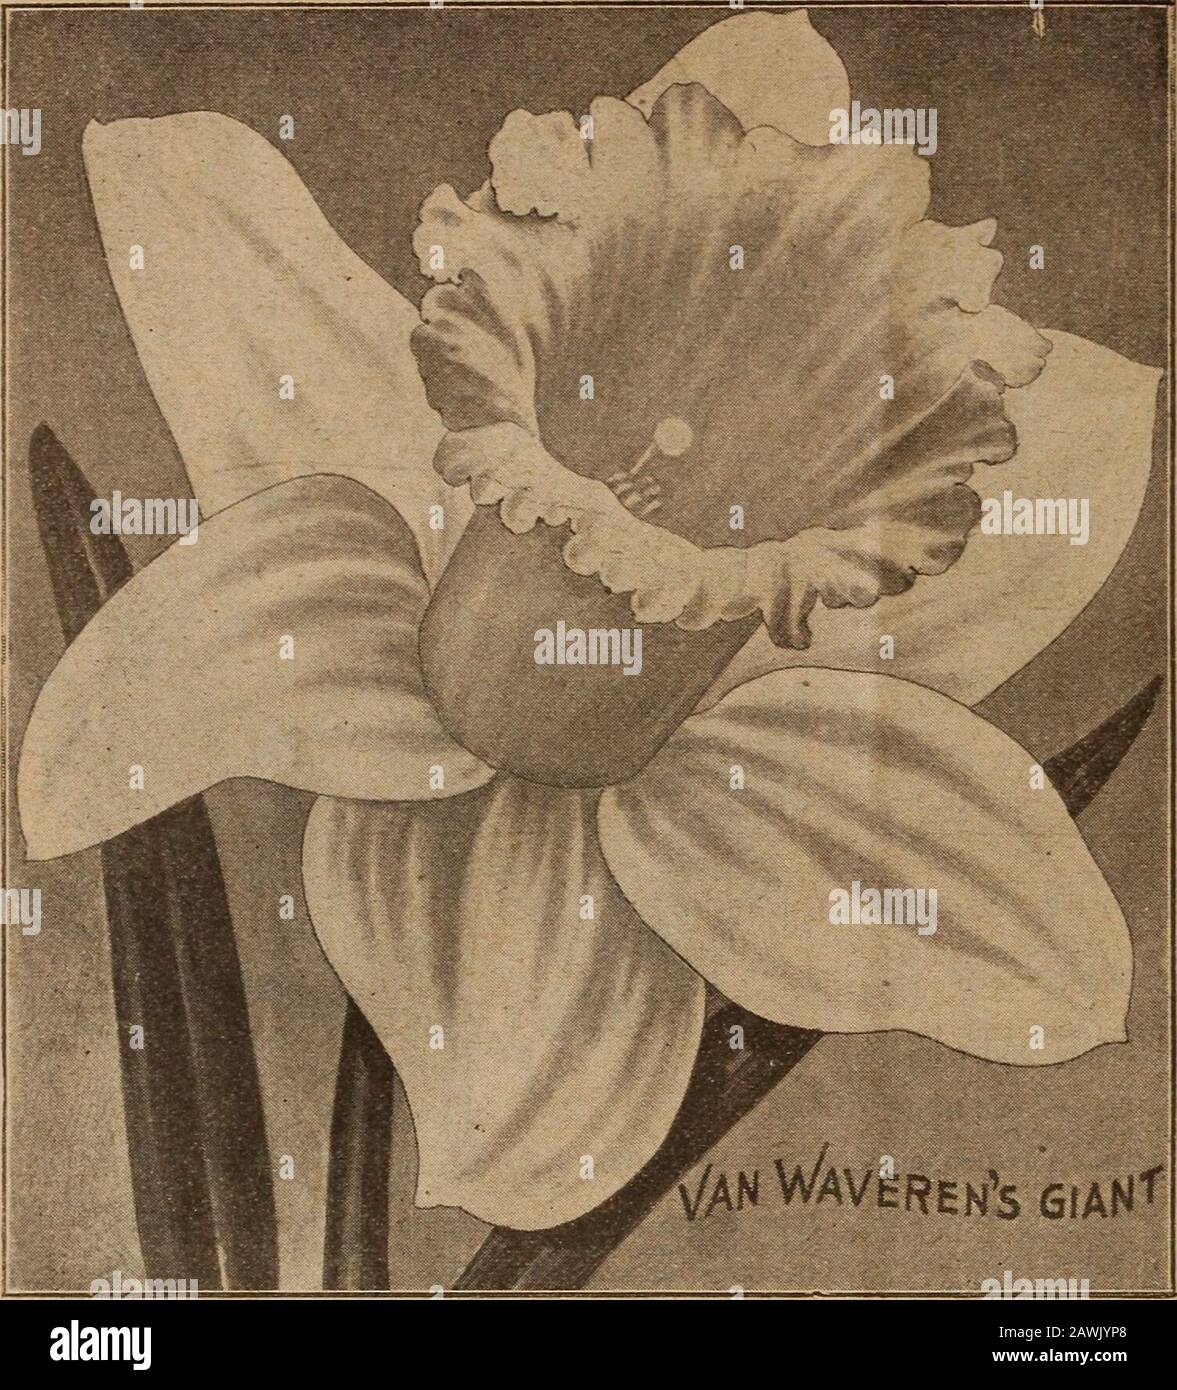 Childs' bulbs that bloom : bulbs that bloom plants that please berries that bear . Karcissus, Single Short Trumpet 14 John Lewis Childs, Inc., Floral Park, N. Y.. NEW NARCISSUS It can safely be said that thefollowing new sorts are wonder-ful. For large size and exquisitebeauty they are marvels.Van Waverens Giant—Flowers ofhuge dimensions the largest ofall Narcissus and the one thaicaused the big excitement atthe New York Flower Show.Perianth primrose with brightyellow trumpet. Fine forforcing. 50c each; 3 for $1.25.King Alfred — Large, .delicateflowers, both perianth andtrumpet being a rich go Stock Photo